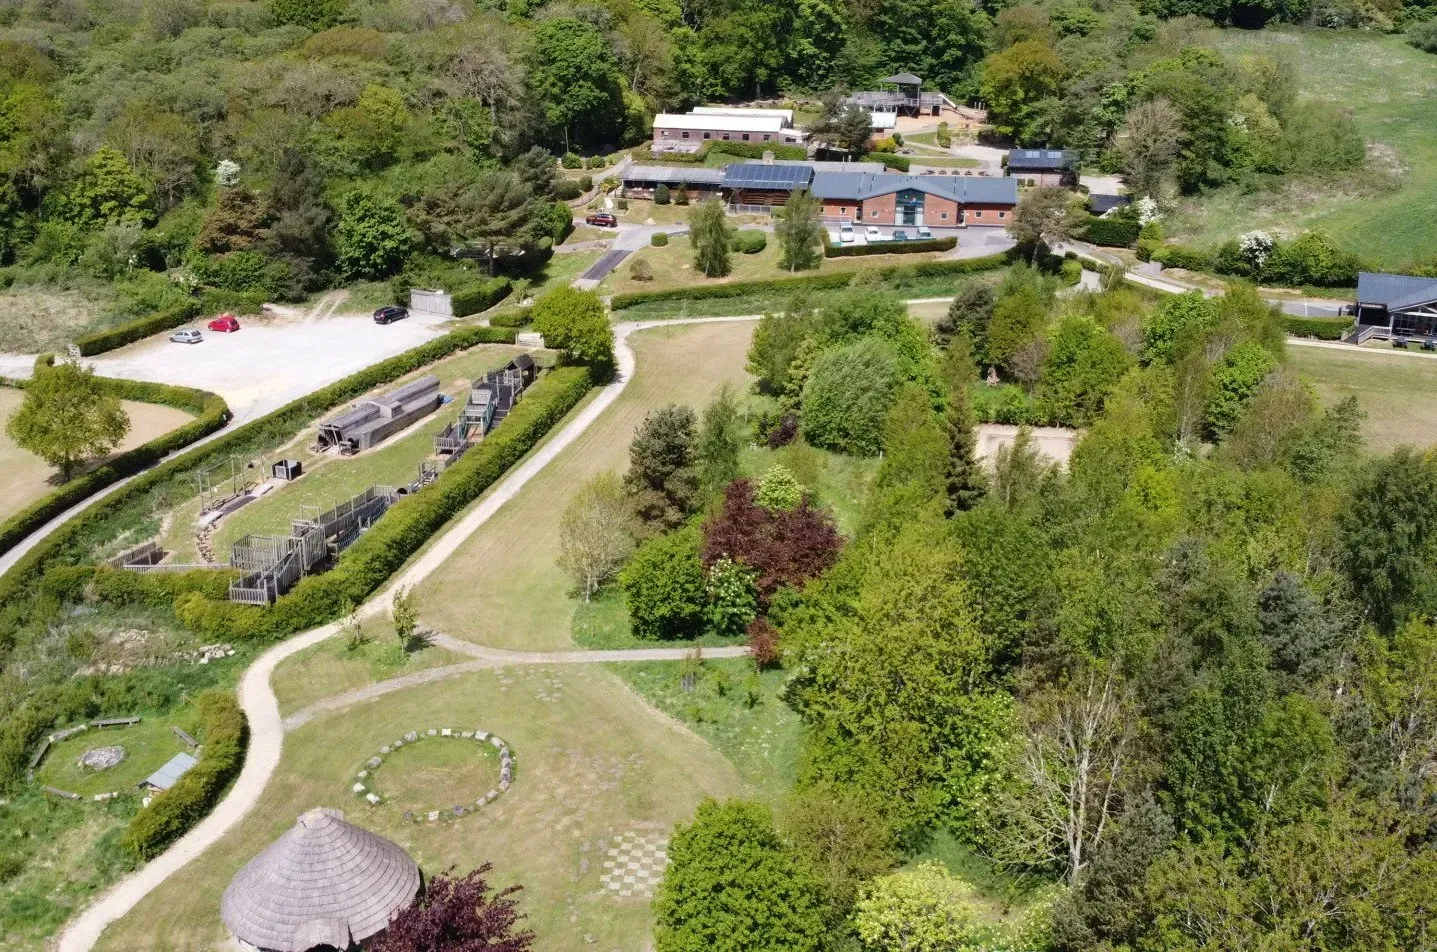 Ariel photograph of Nell Bank's Outdoor learning centre in Ilkley